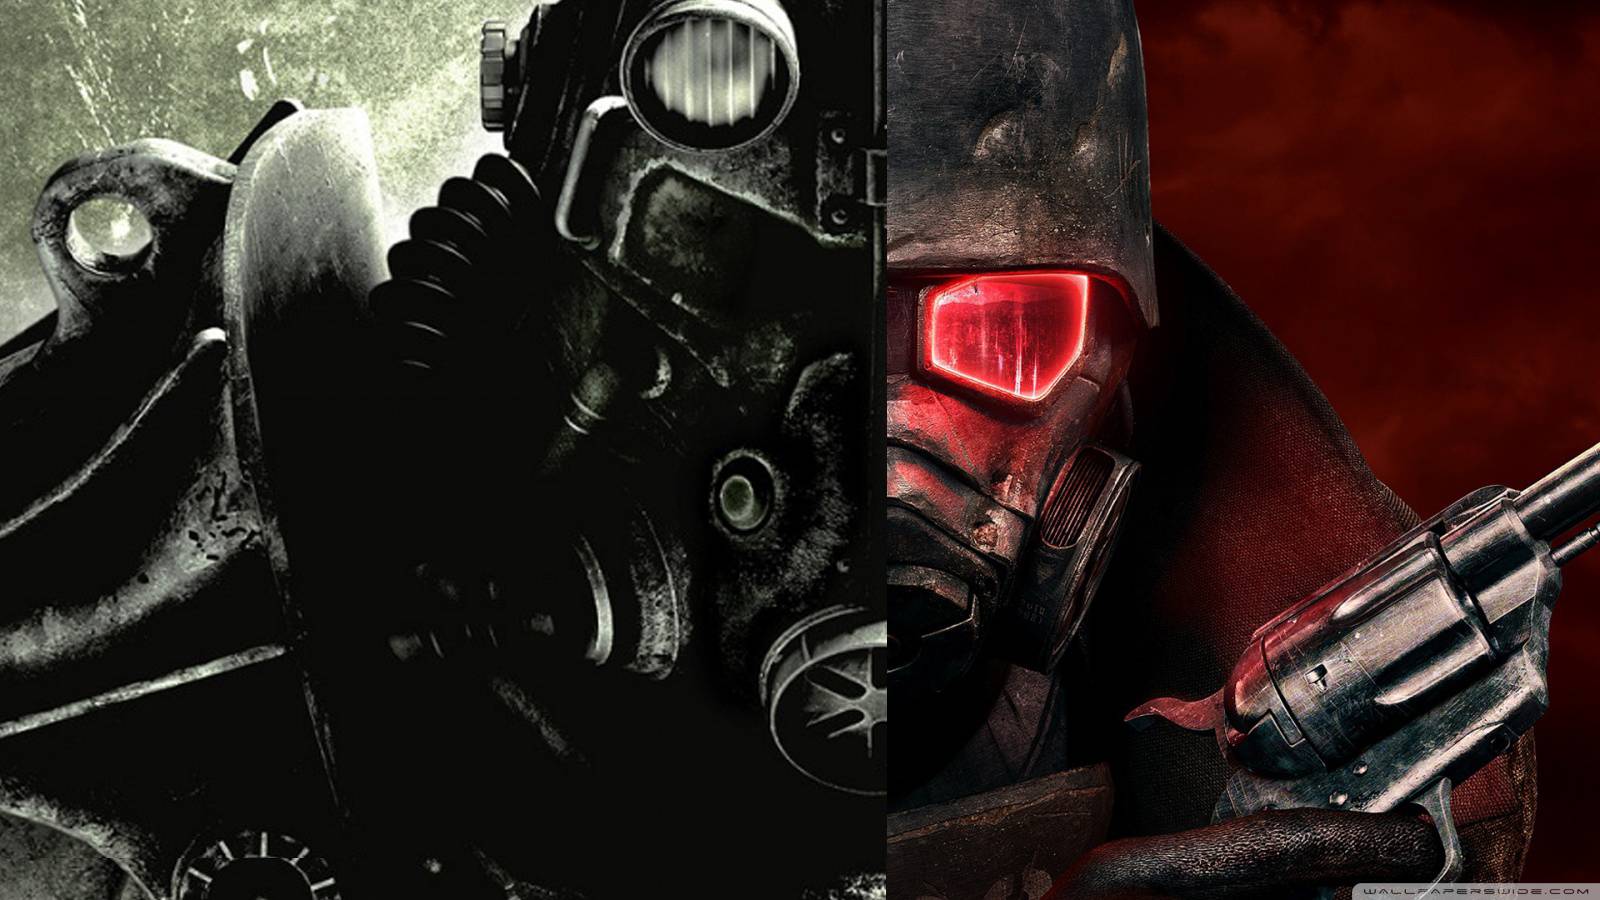 Free Download Download Fallout New Vegas Hd Wallpapers For Bsnscb 1600x900 For Your Desktop Mobile Tablet Explore 69 Fallout New Vegas Wallpapers Fallout New Vegas Wallpaper 1080p Fallout Wallpaper